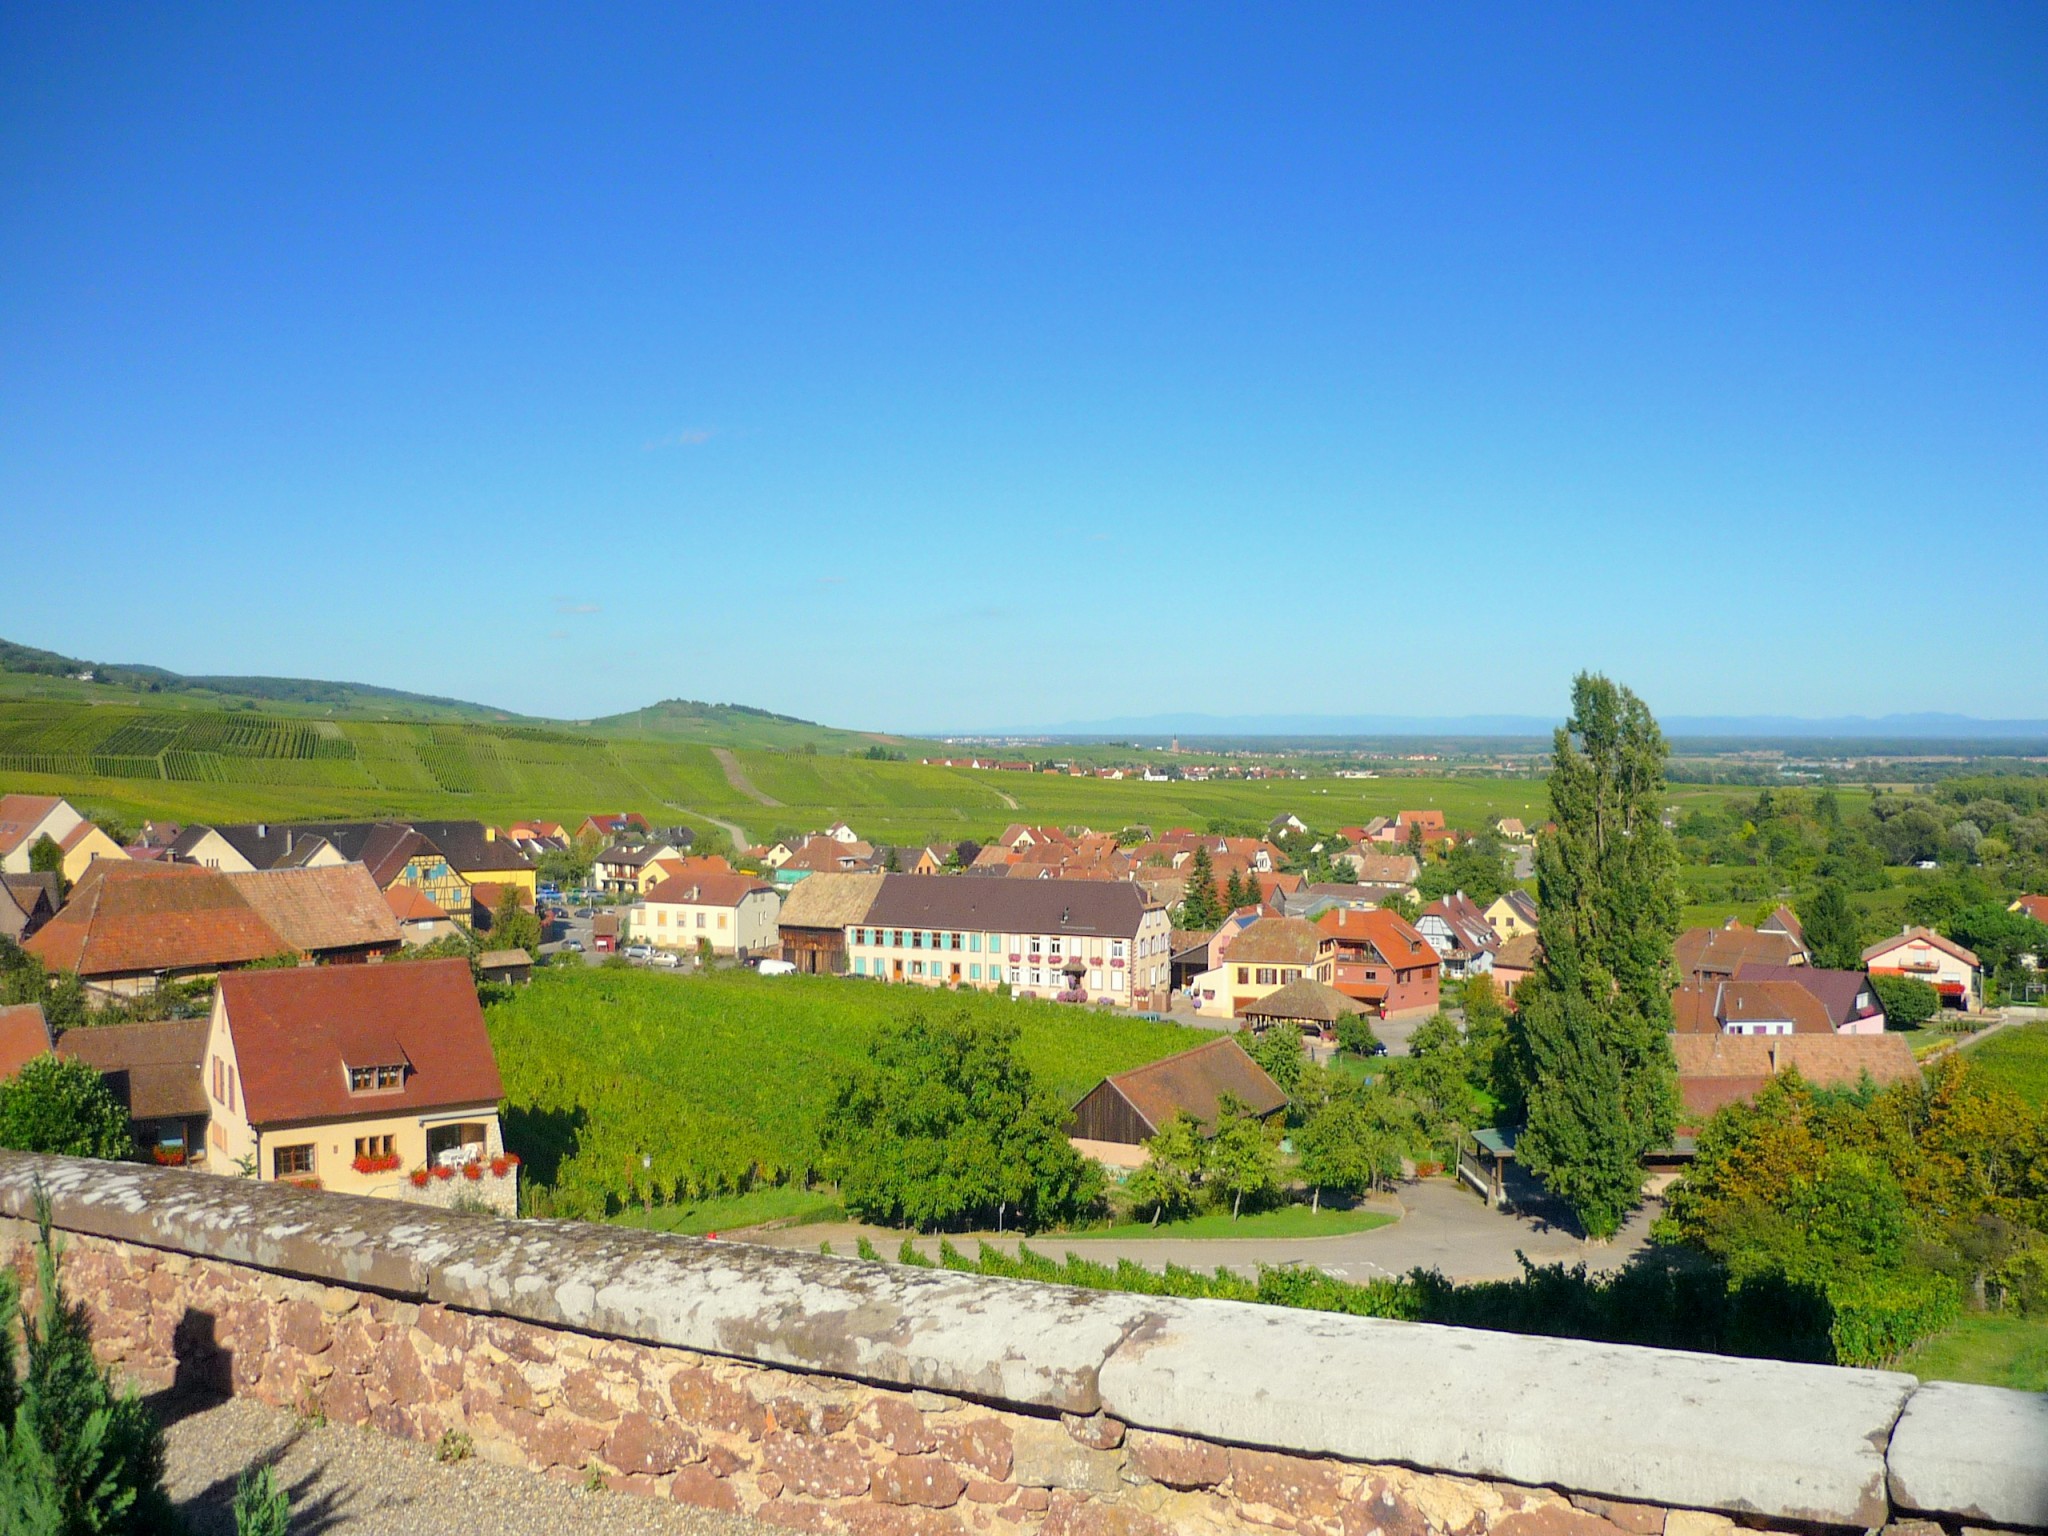 General view of Hunawihr, Alsace © French Moments